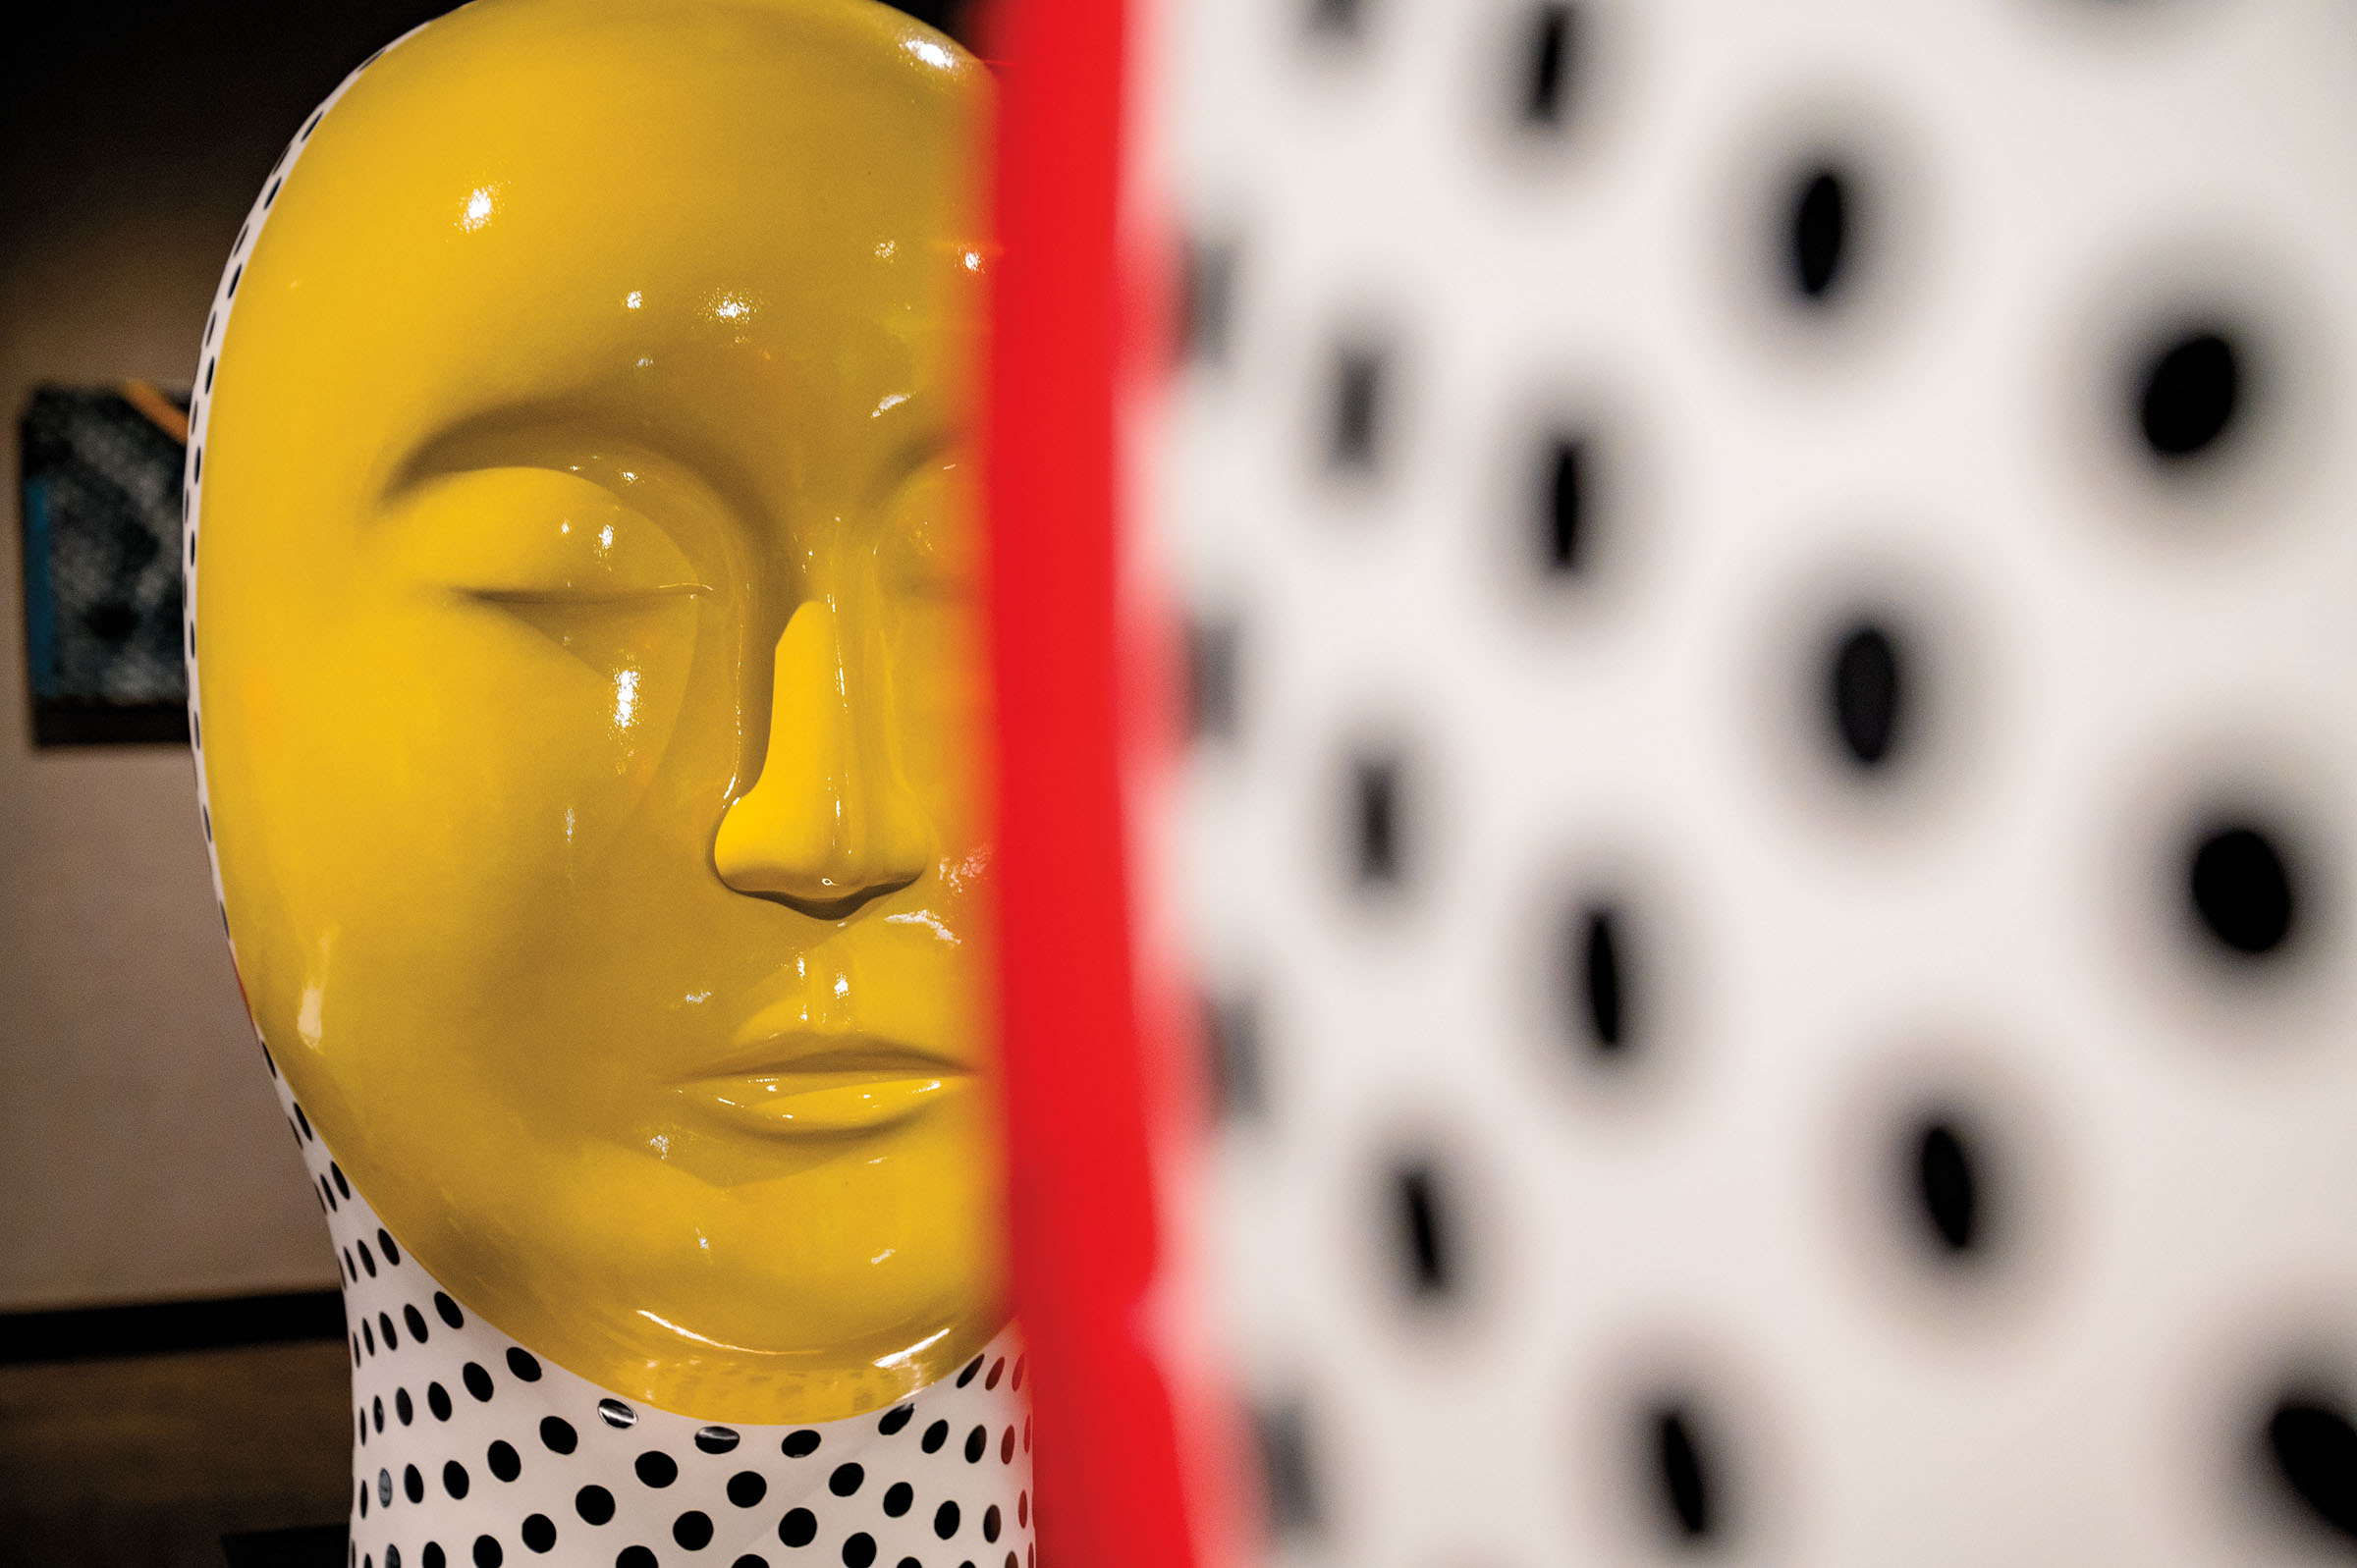 A sculpture in the shape of a yellow face sits in the background of a museum with polka dots in the foreground